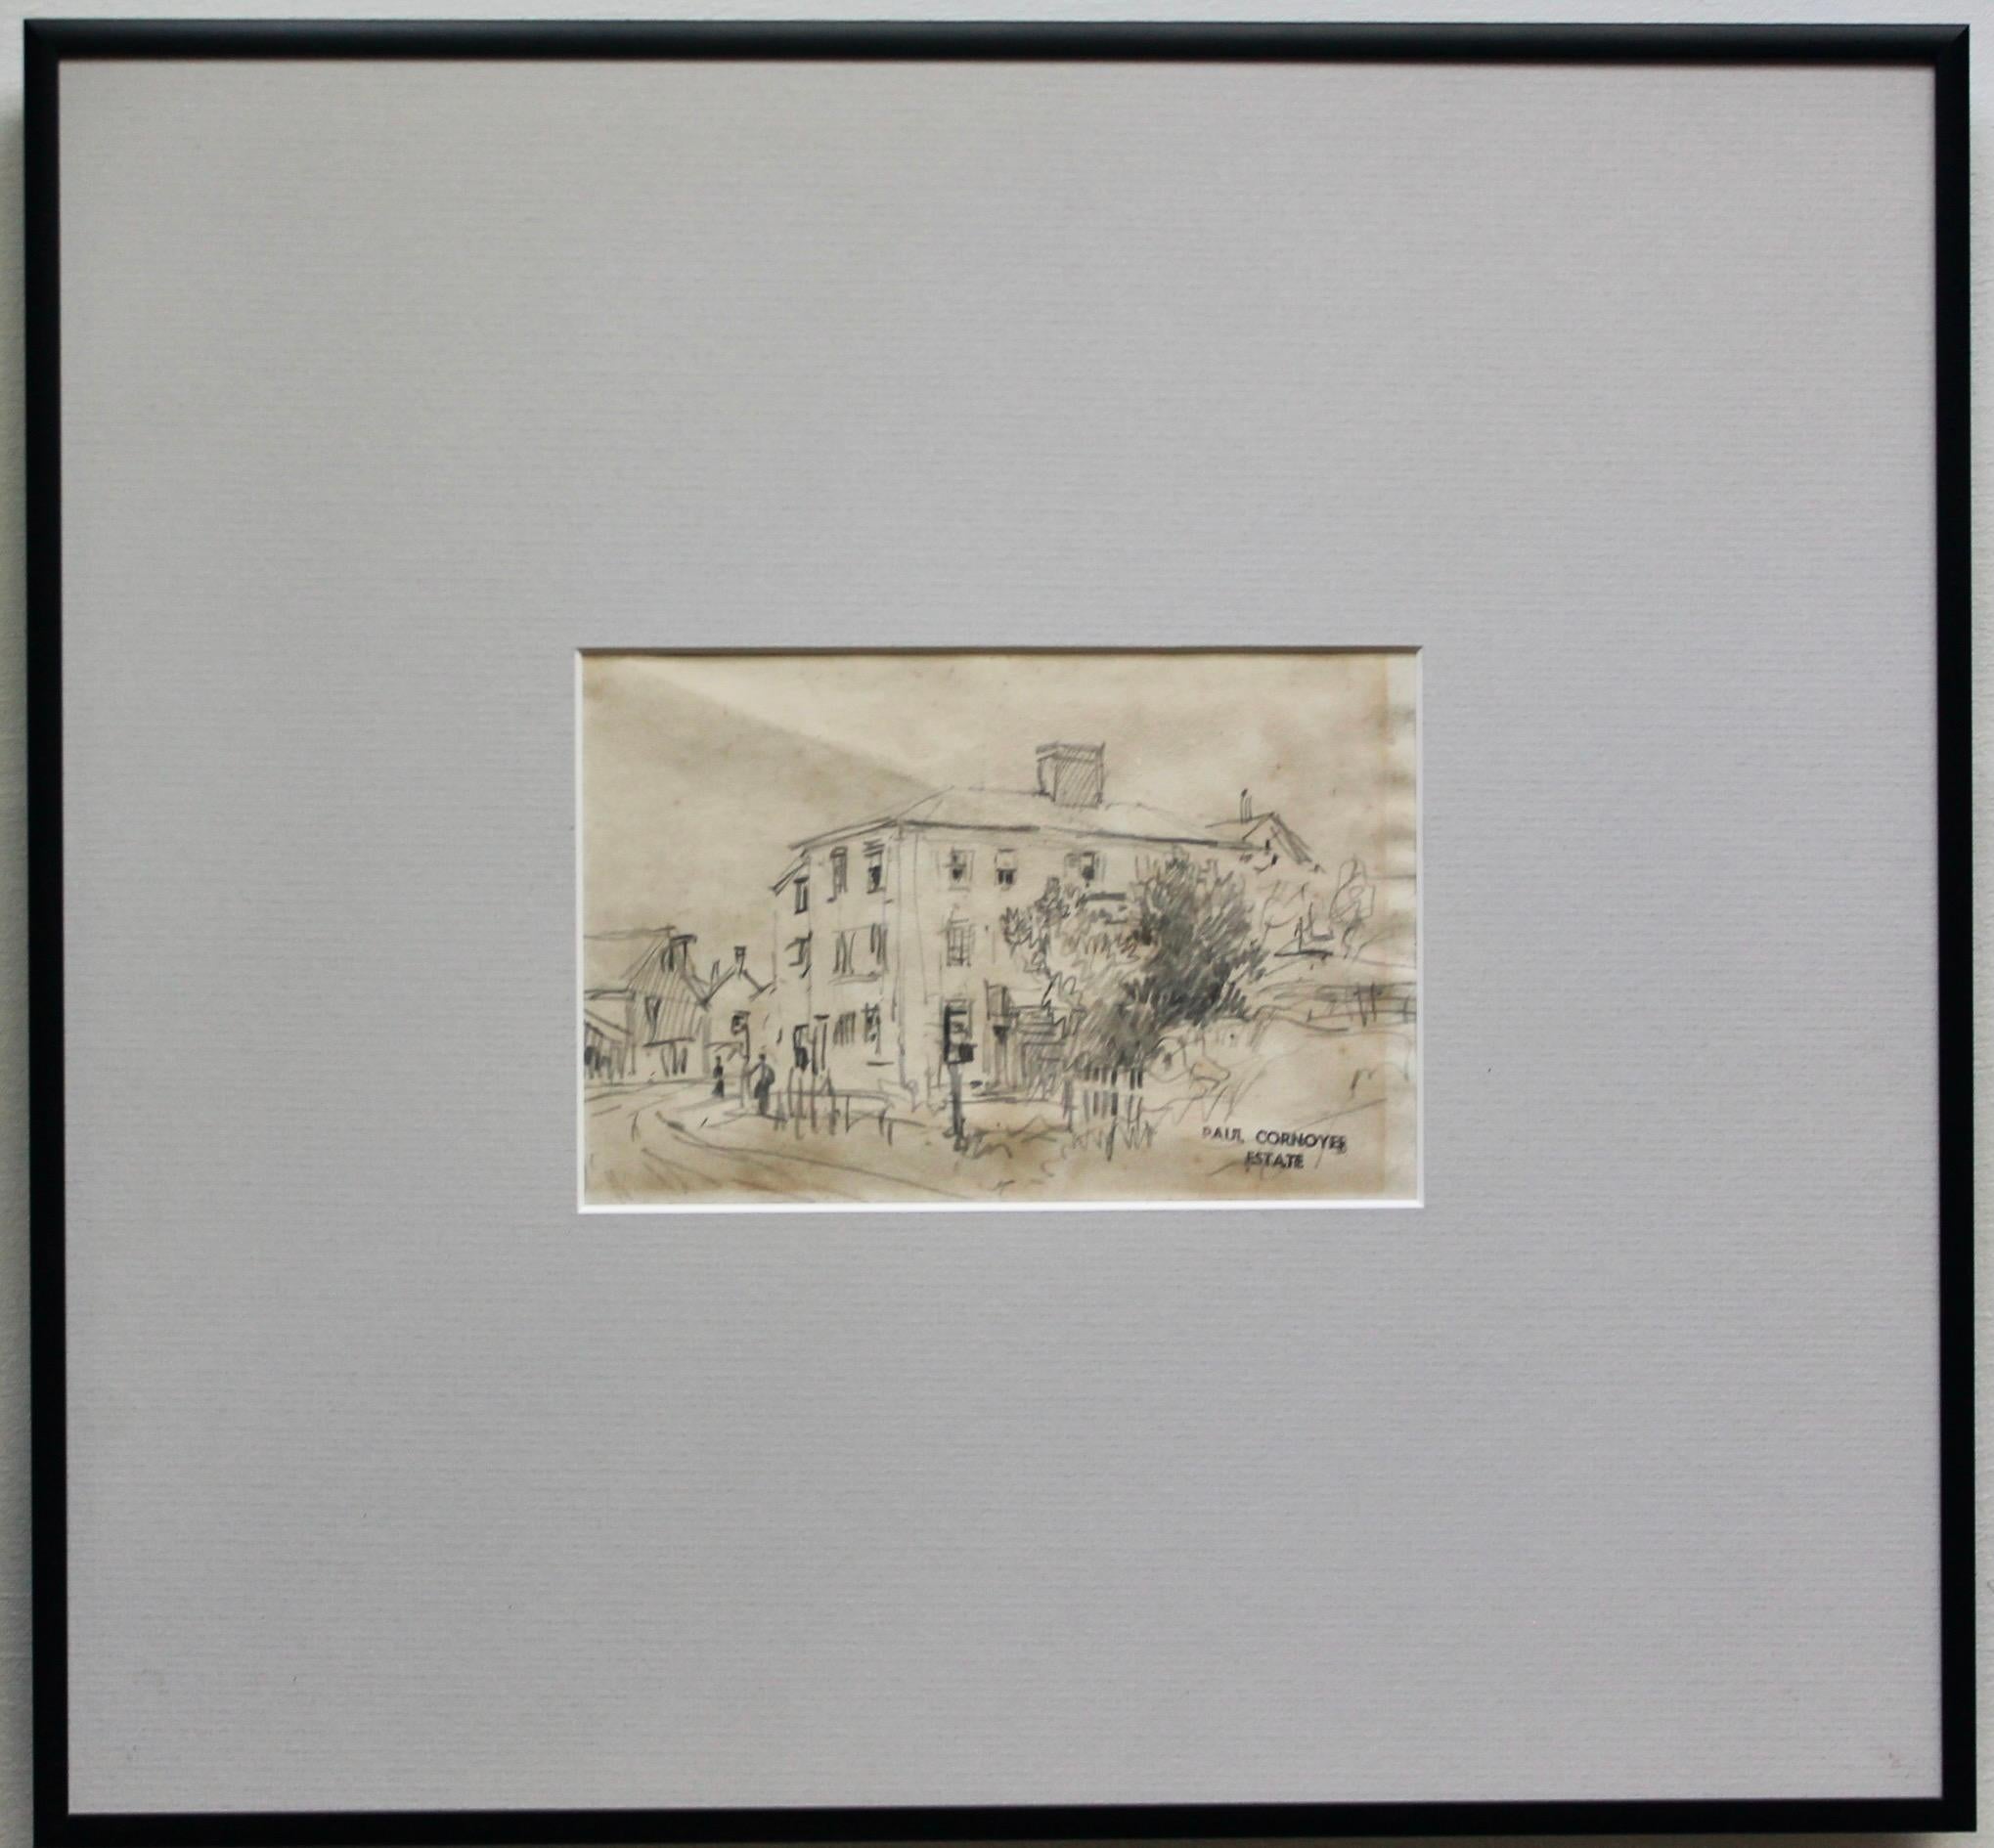 These Paul Cornoyer pencil sketches all bear labels from the David Findlay Jr.
Gallery and were exhibited in the 1973 Cornoyer Retrospective at The Lakeview Center for the Arts & Sciences in Peoria Illinois. The exhibition drew heavily from the